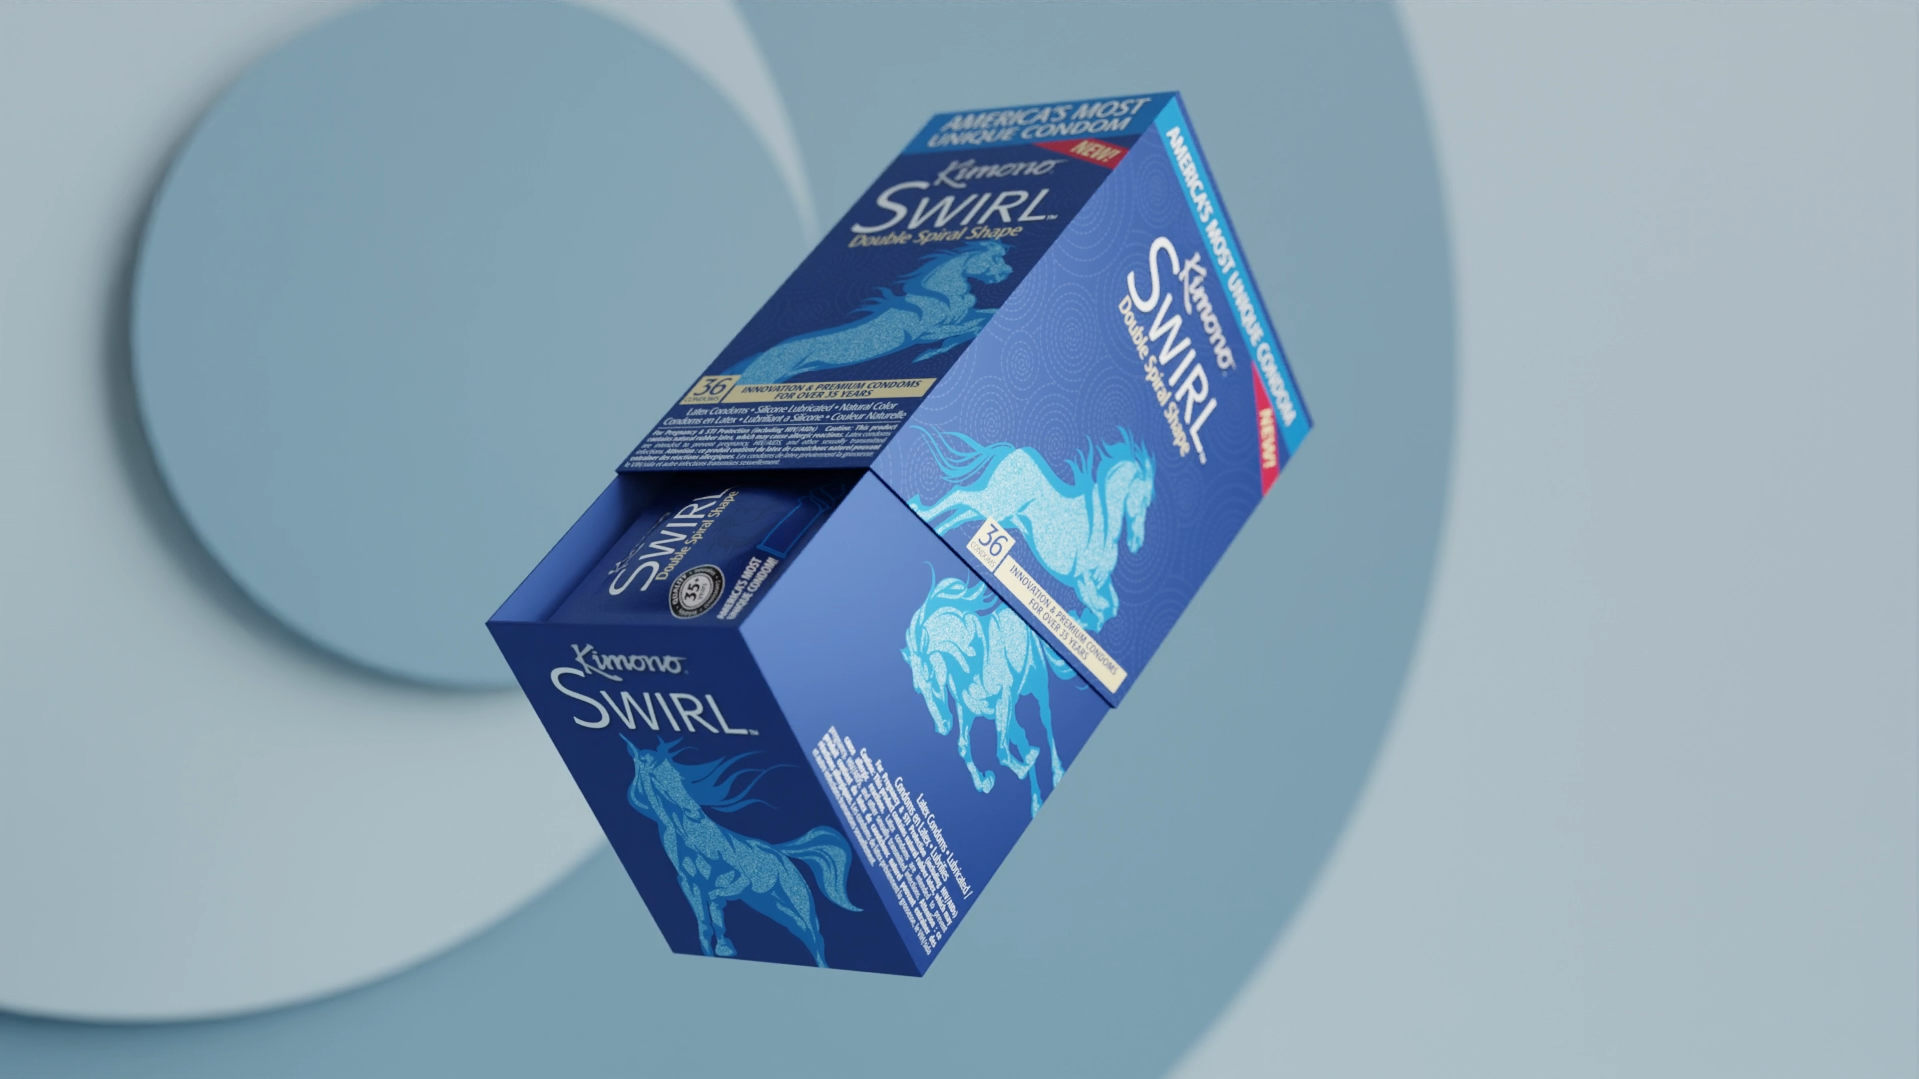 Load video: Kimono Swirl condoms, America&#39;s only double helix shaped condom. The condom is revealed out of the packaging. It uses premium natural latex. Less constriction, more comfort. Double swirl for added comfort, friction, and energy. For him, her, and them. What are you waiting for? Get your swirl on.